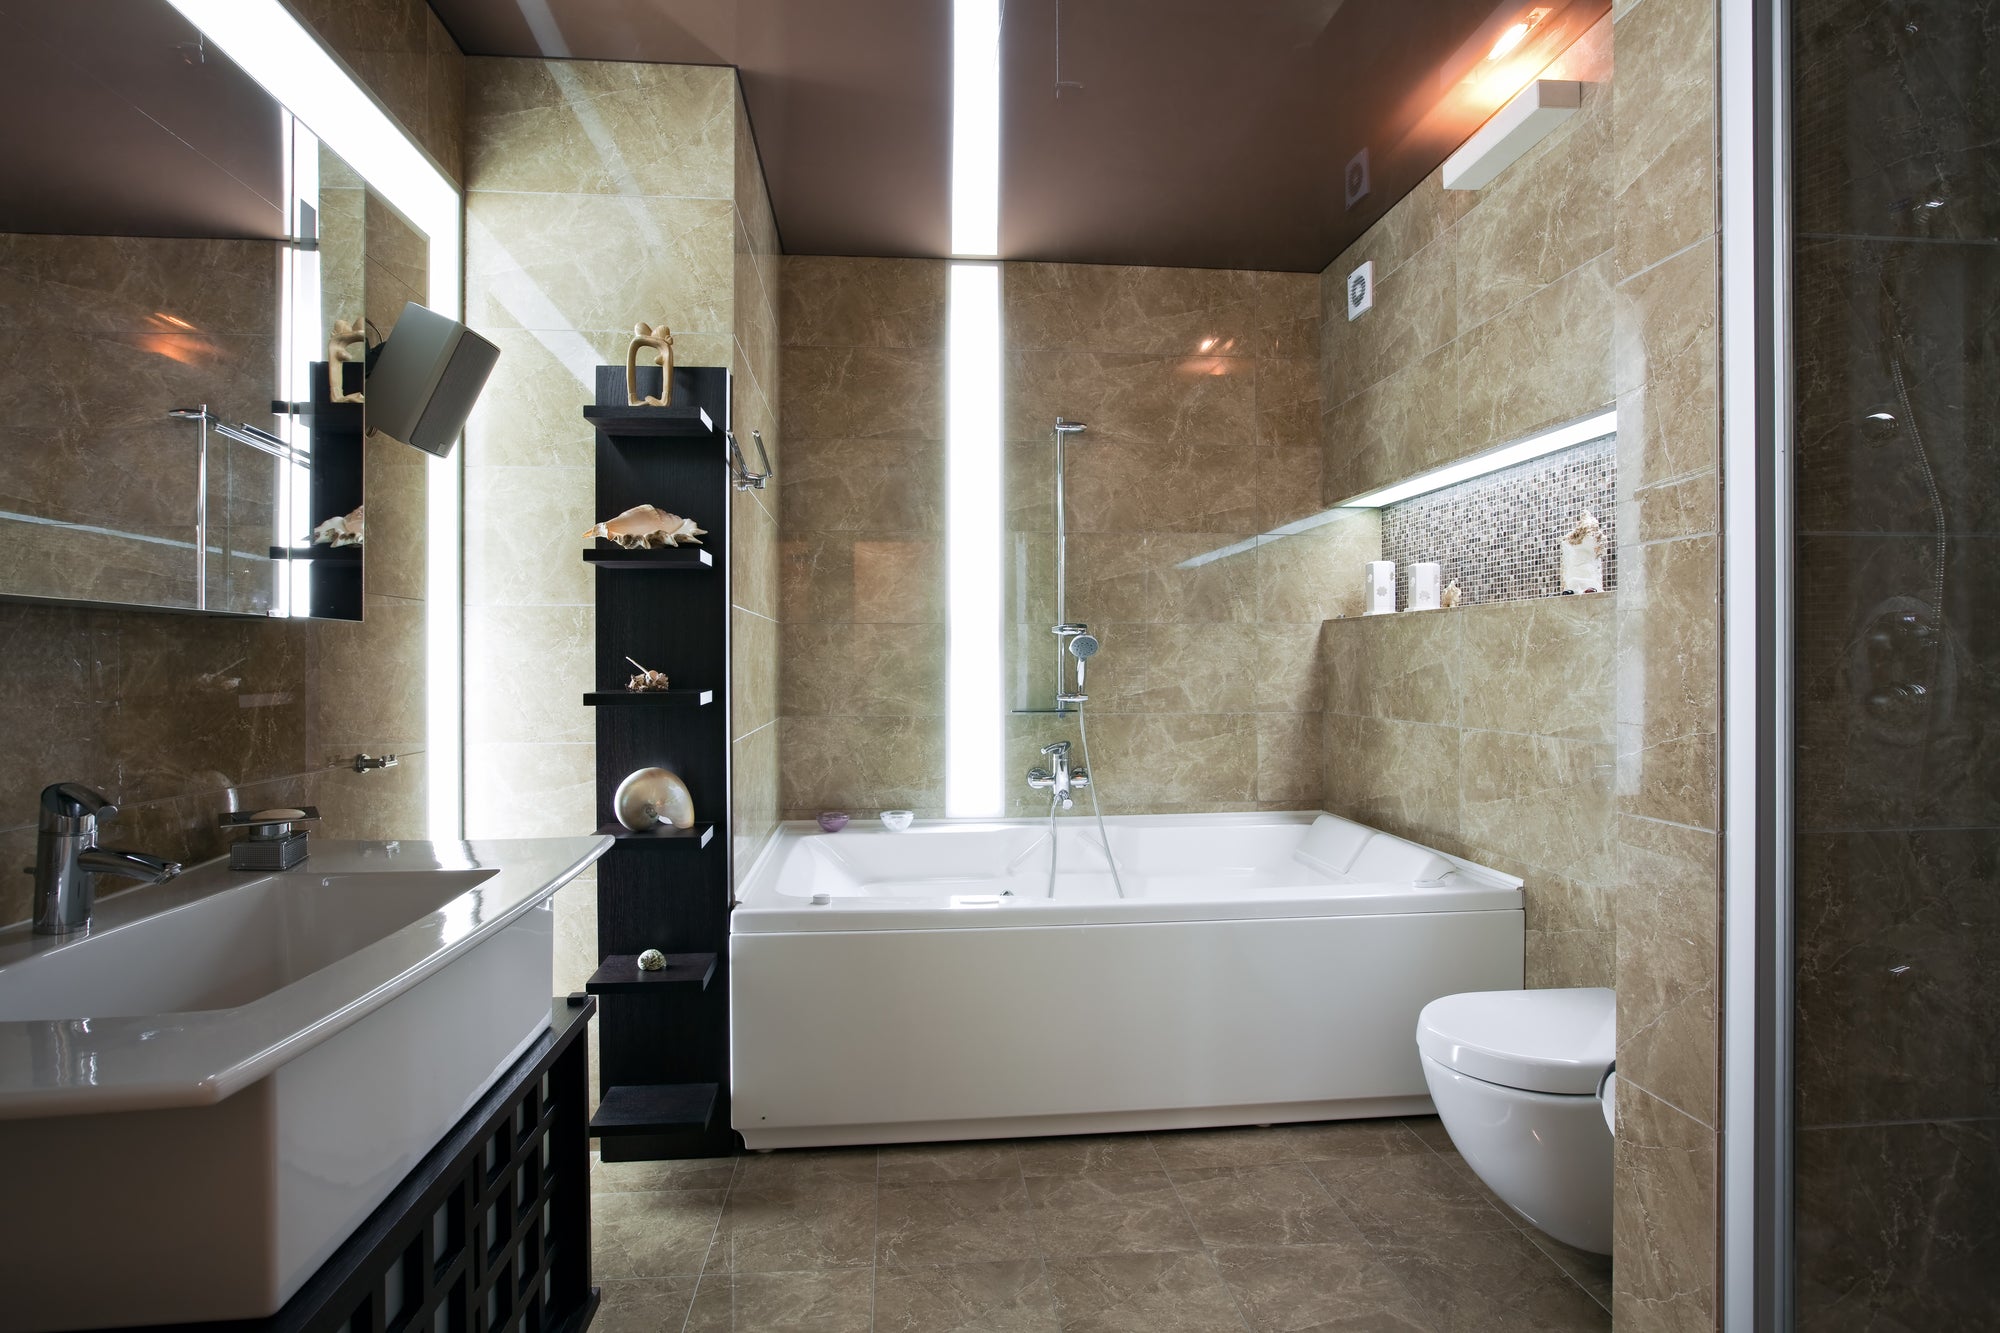 How To Smartly Upgrade Your Bathroom For Less